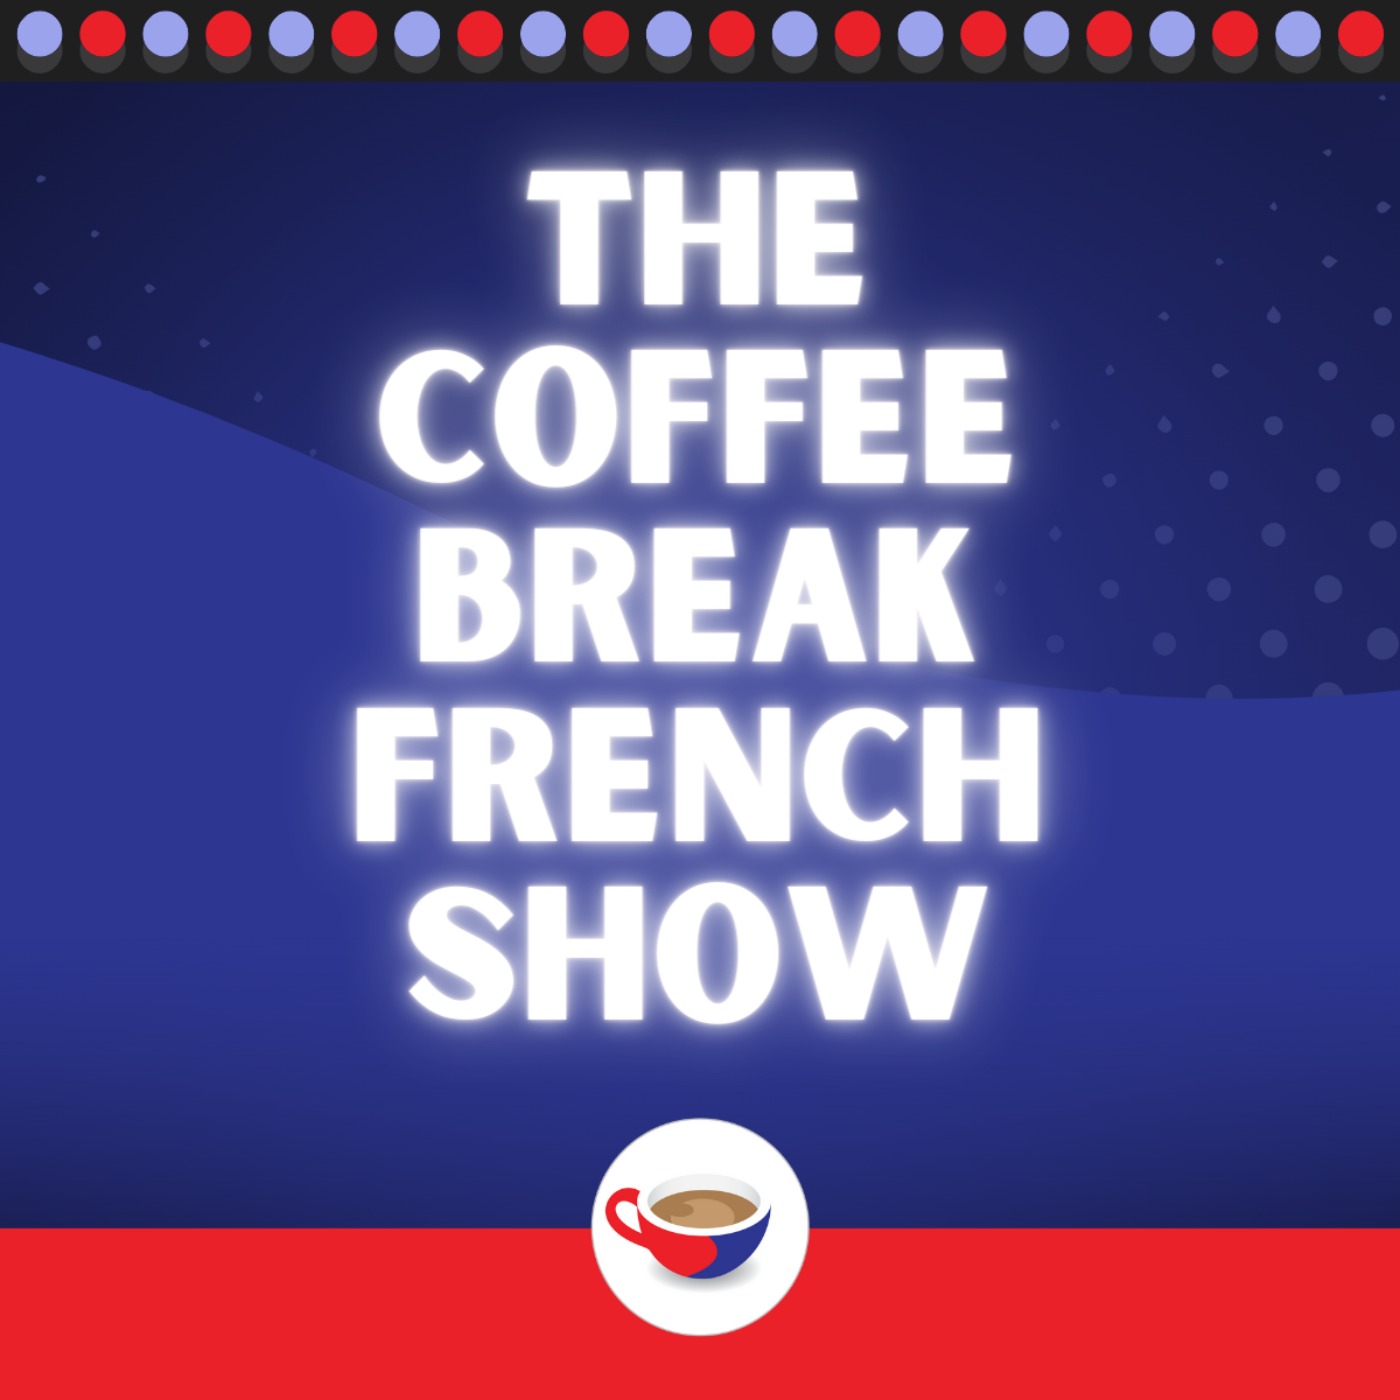 ‘À cause de’ and ‘grâce à’ - What’s the difference? | The Coffee Break French Show 1.10